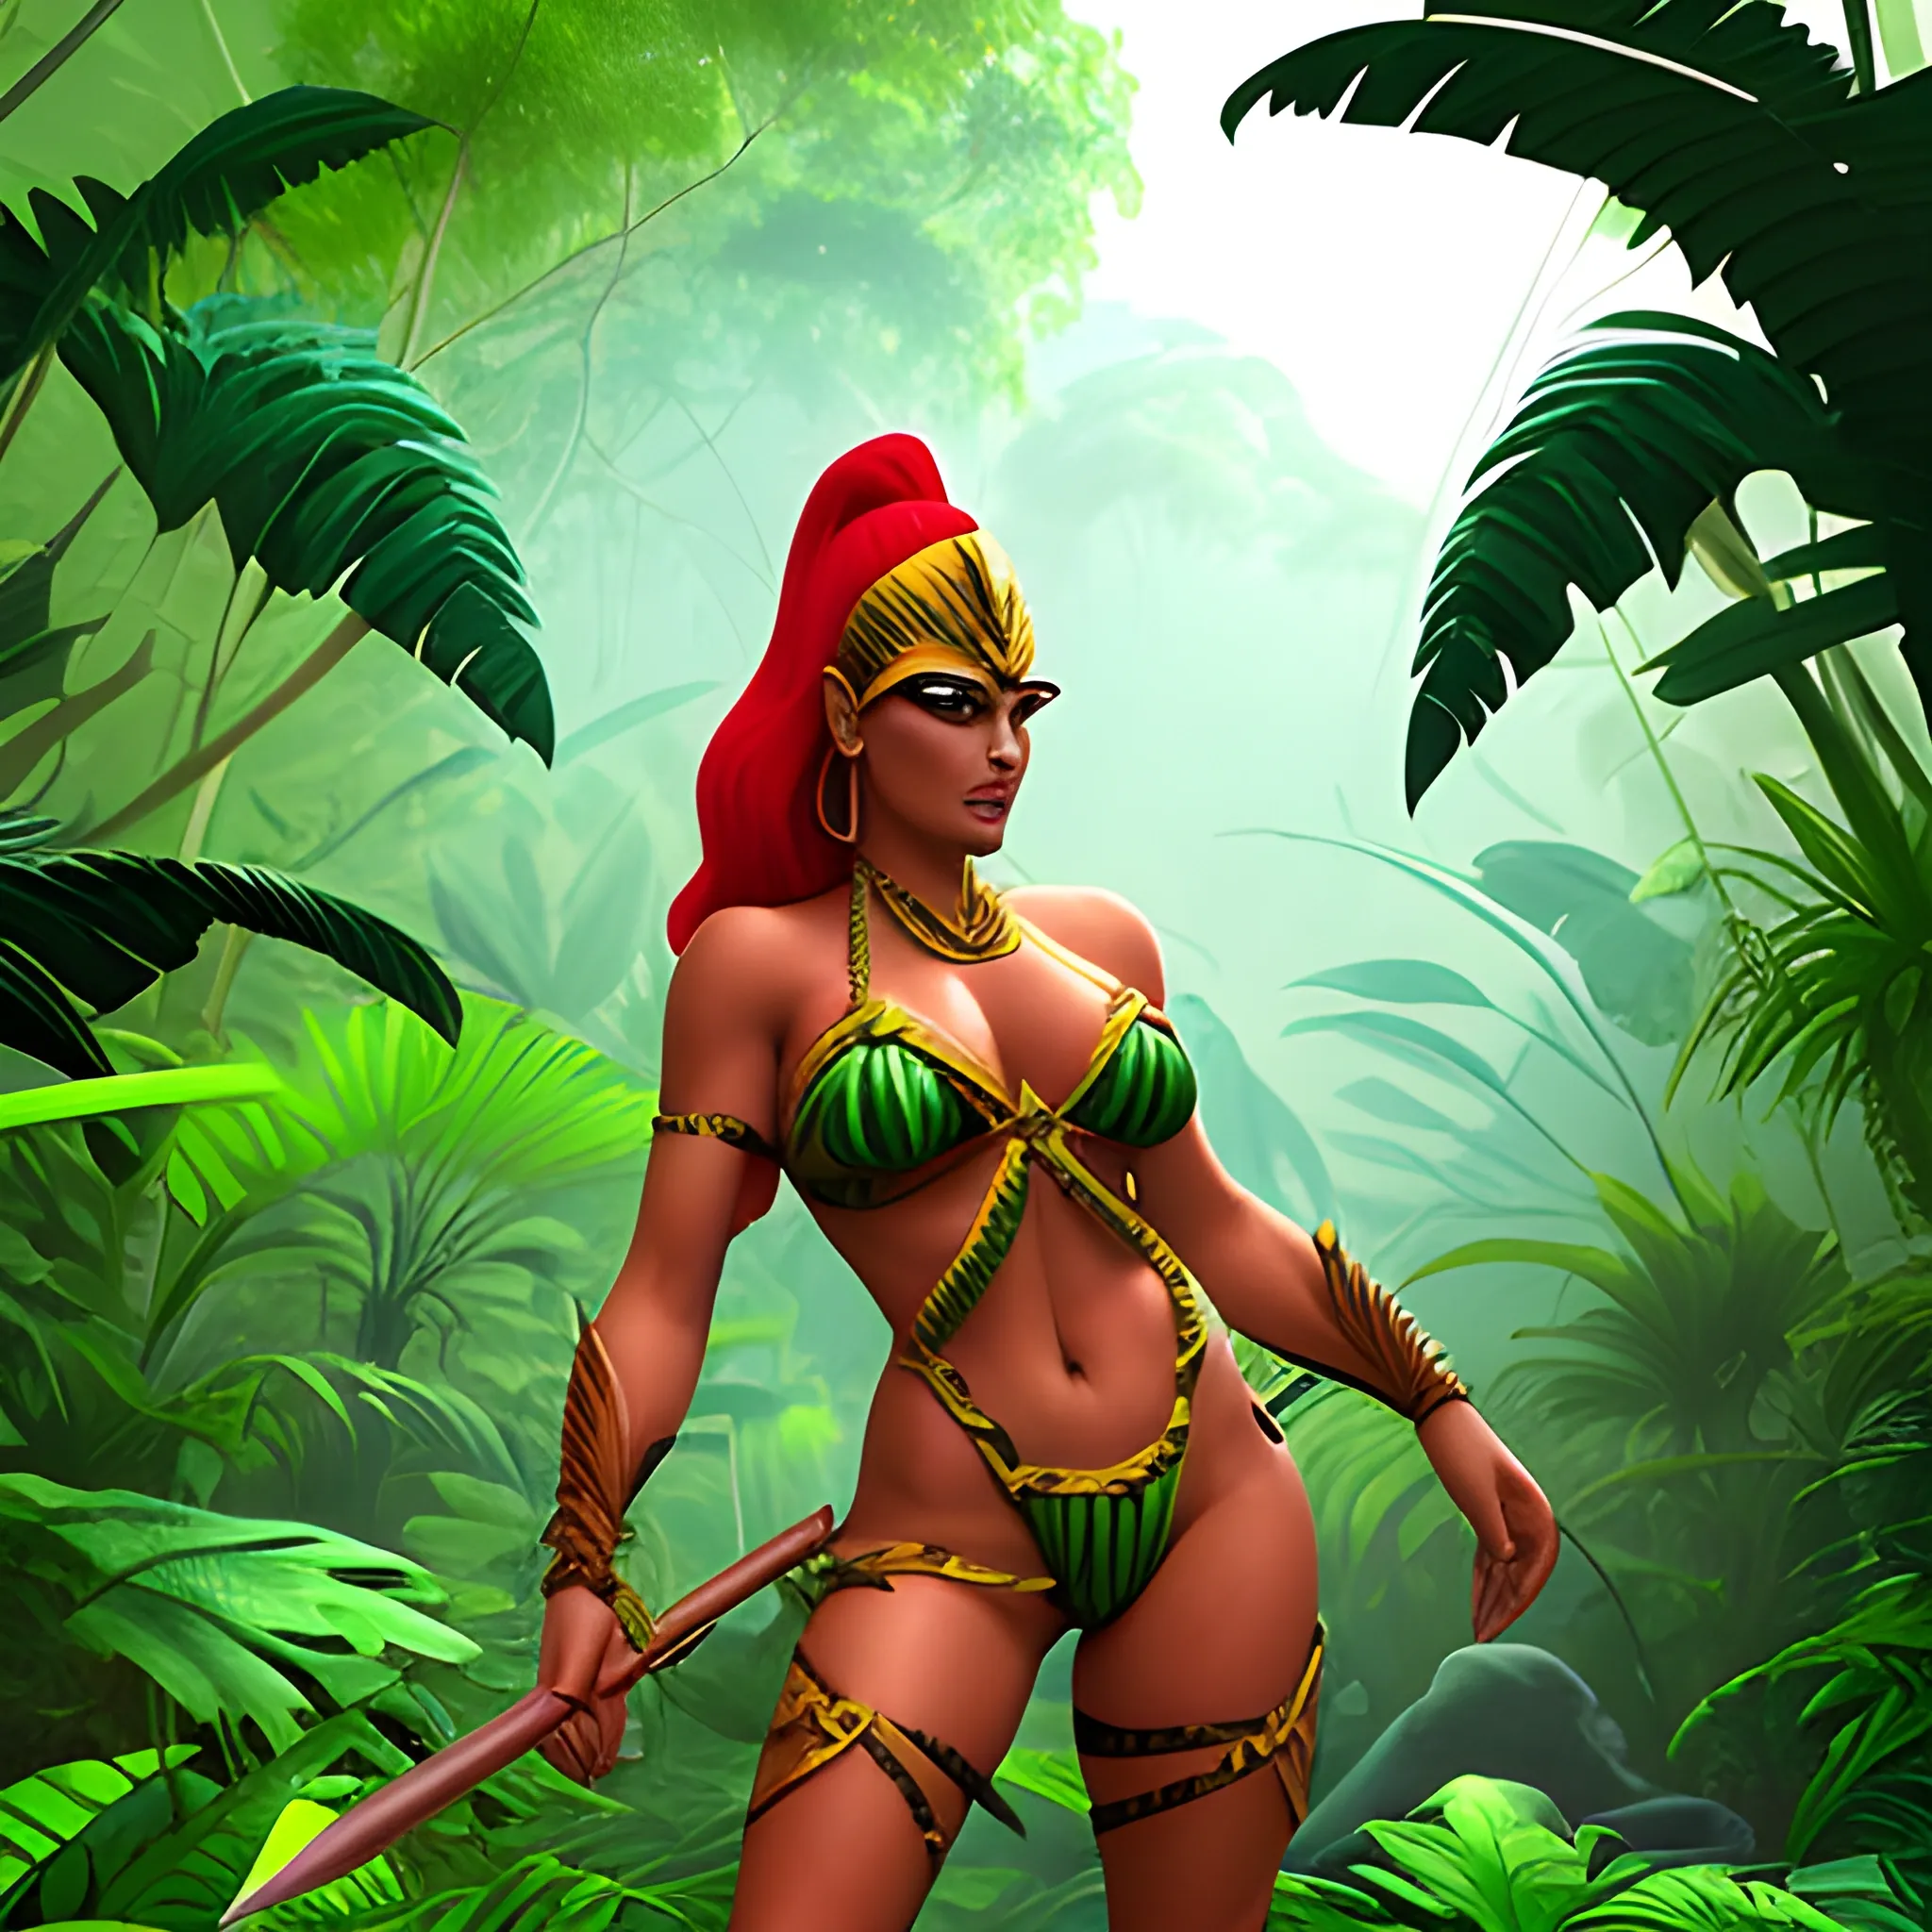 amazonic woman, armed with a spears, 3d style, in the jungle.